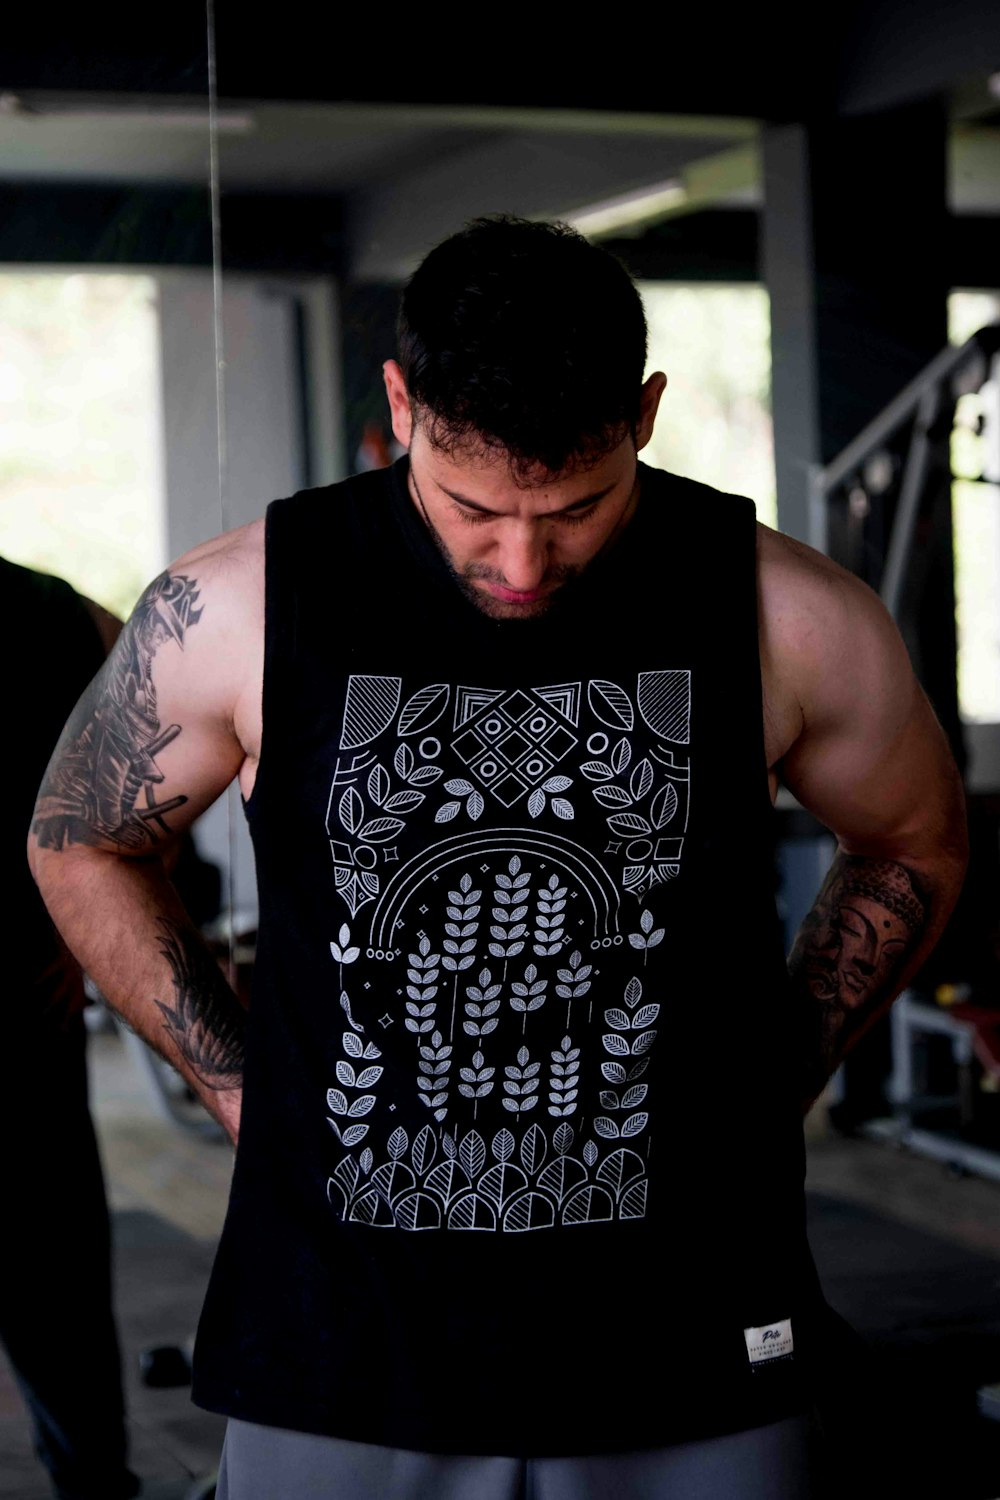 a man with a tattoo on his arm standing in a gym